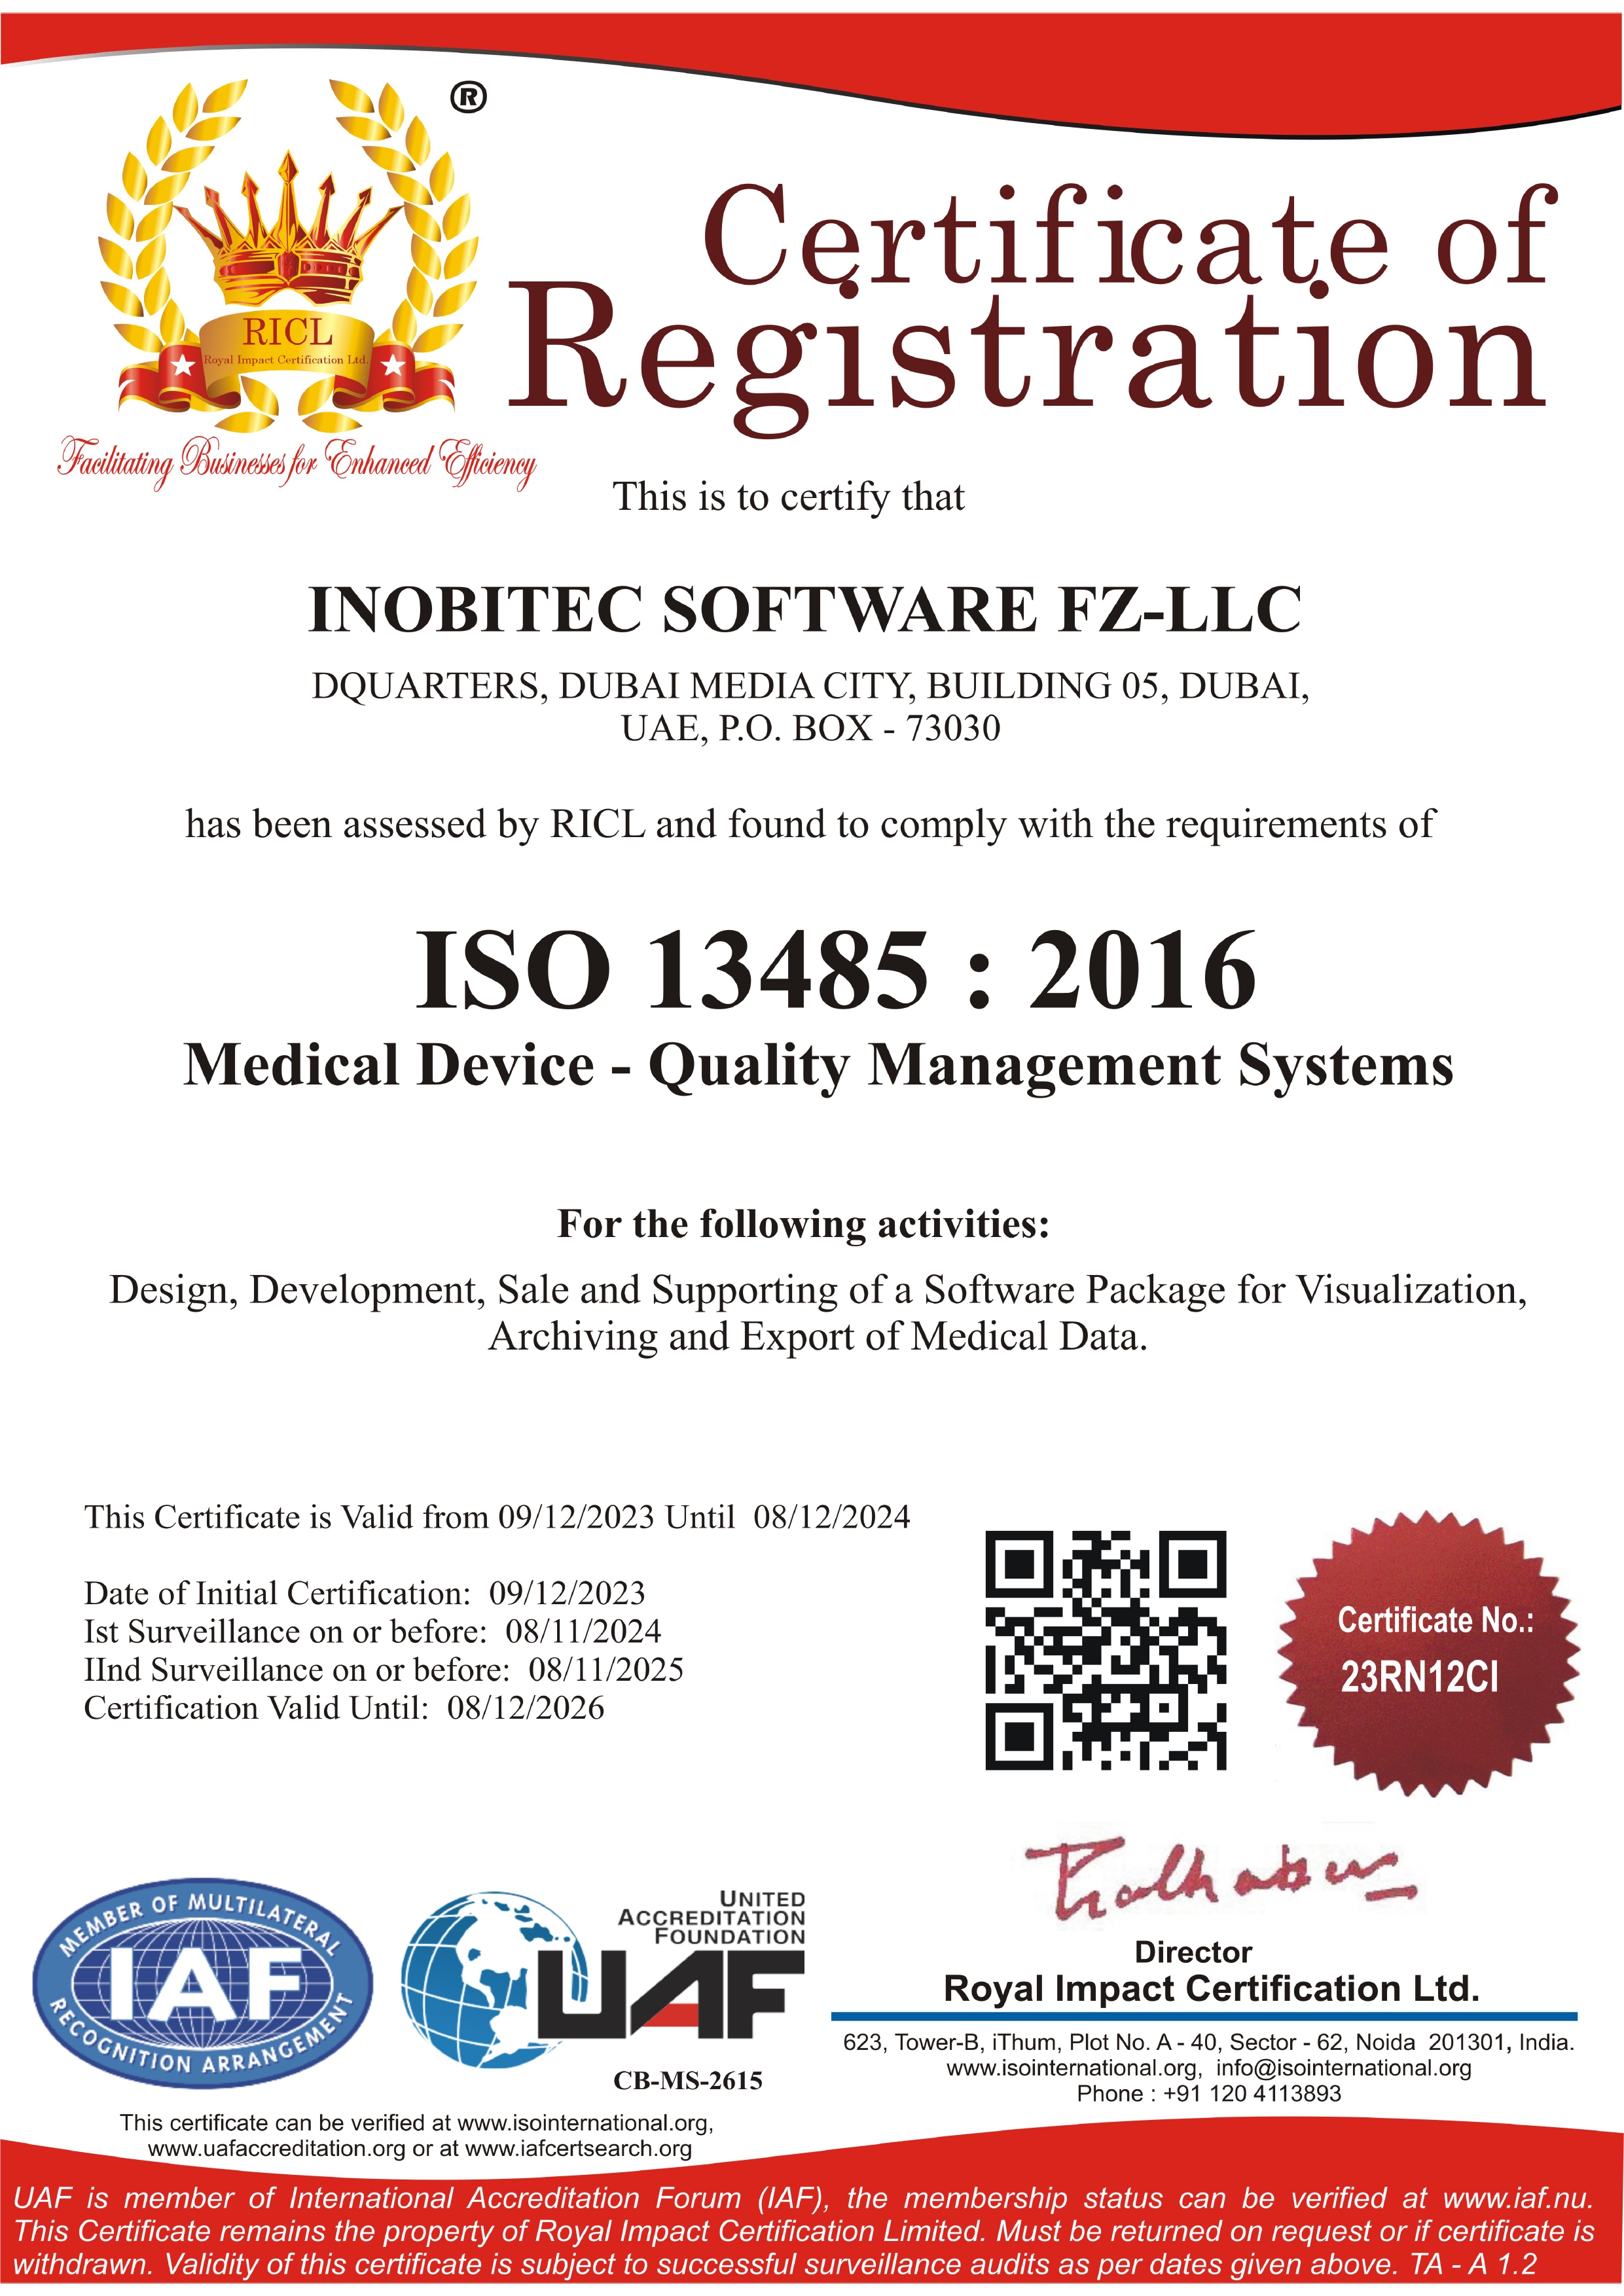 Management system certificate as per EN ISO 13485:2016